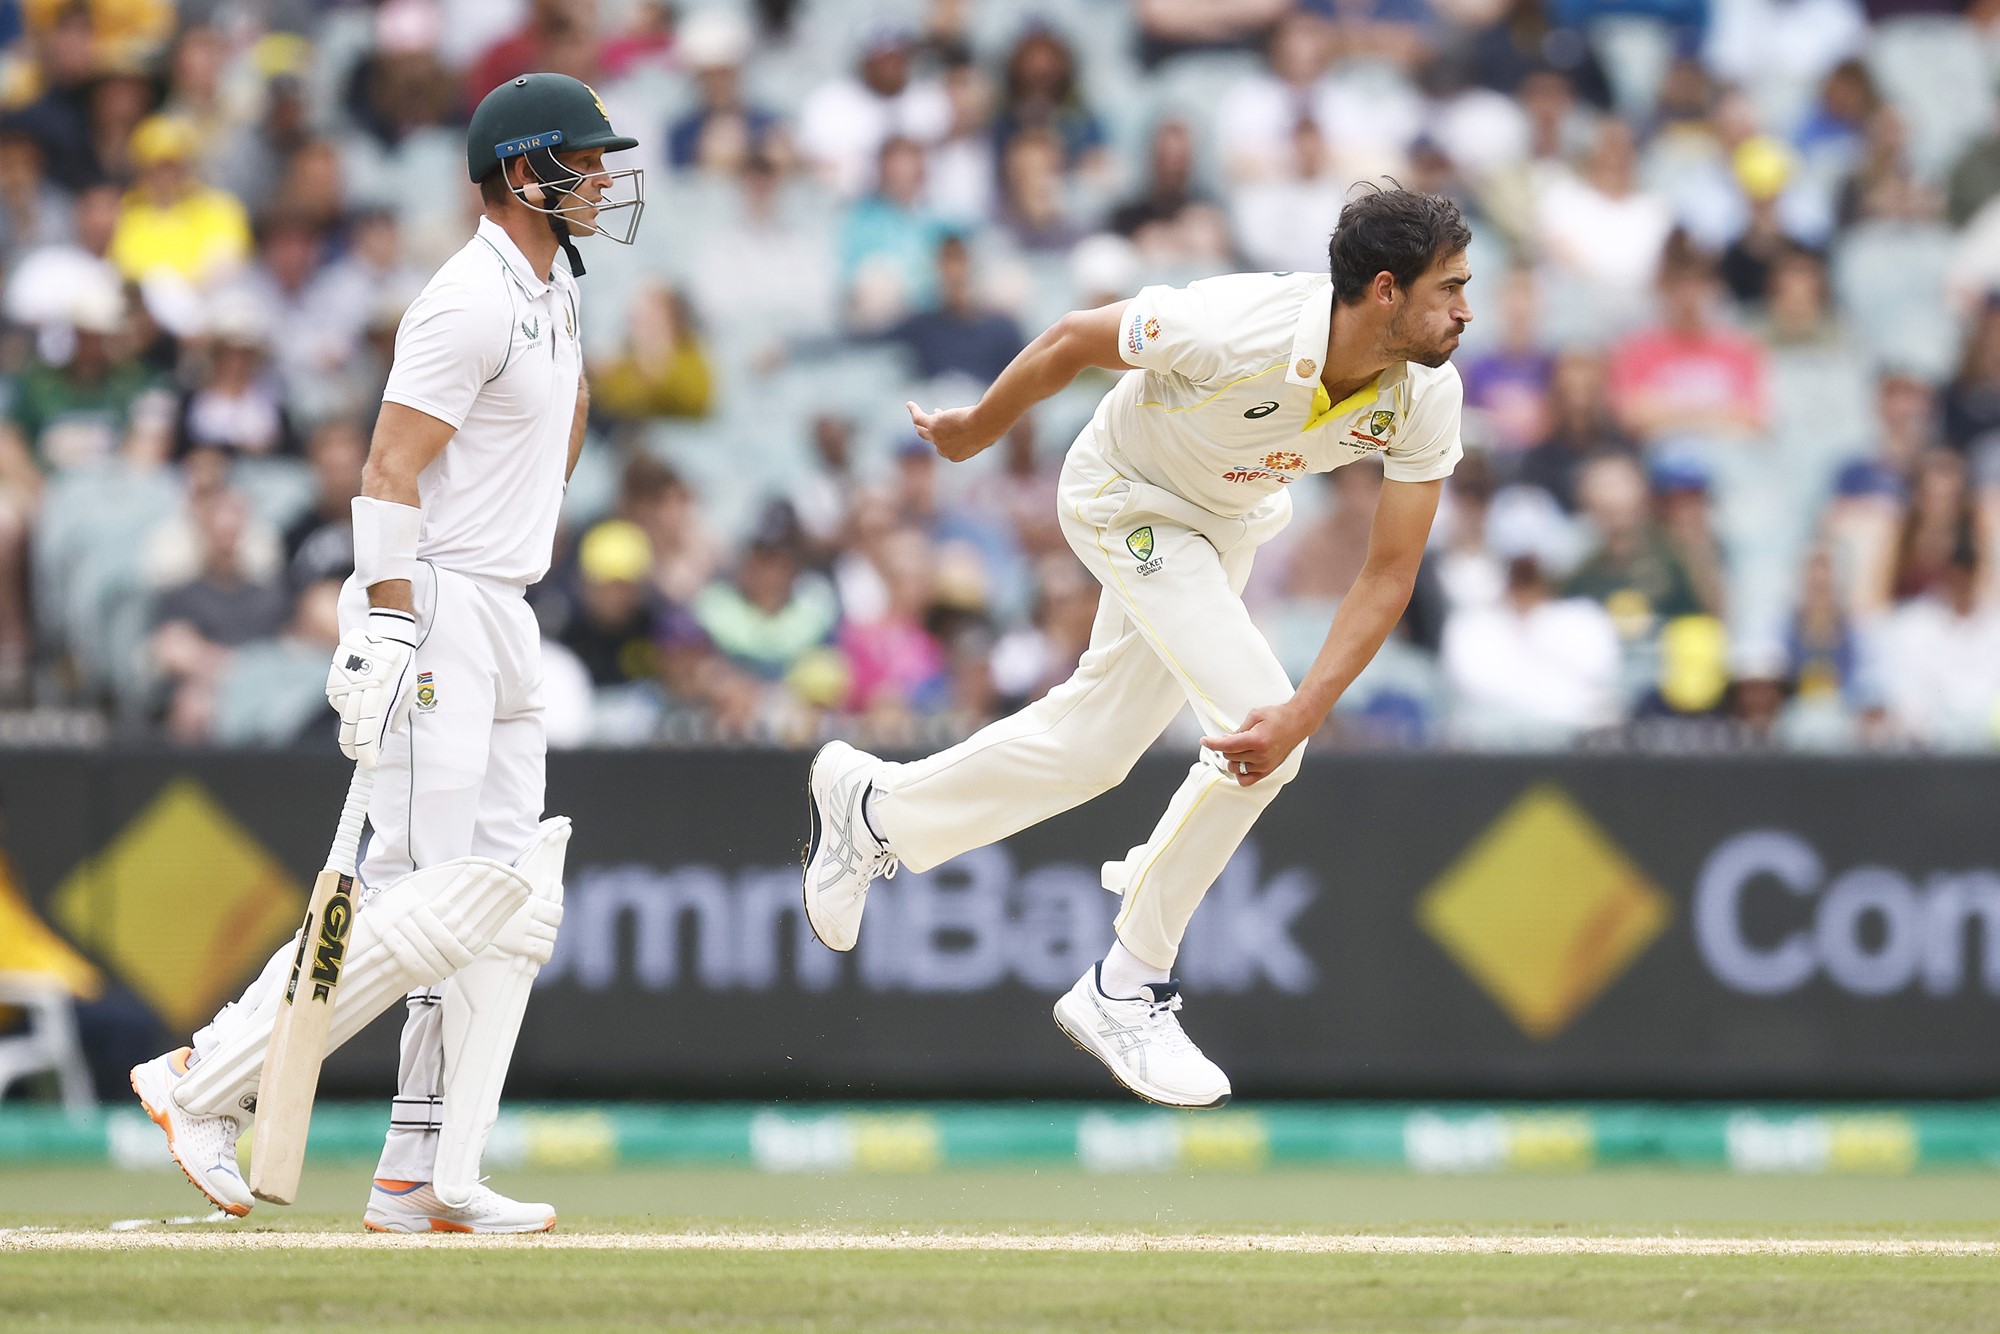 Mitchell Starc completes his bowling action during a Test against South Africa.